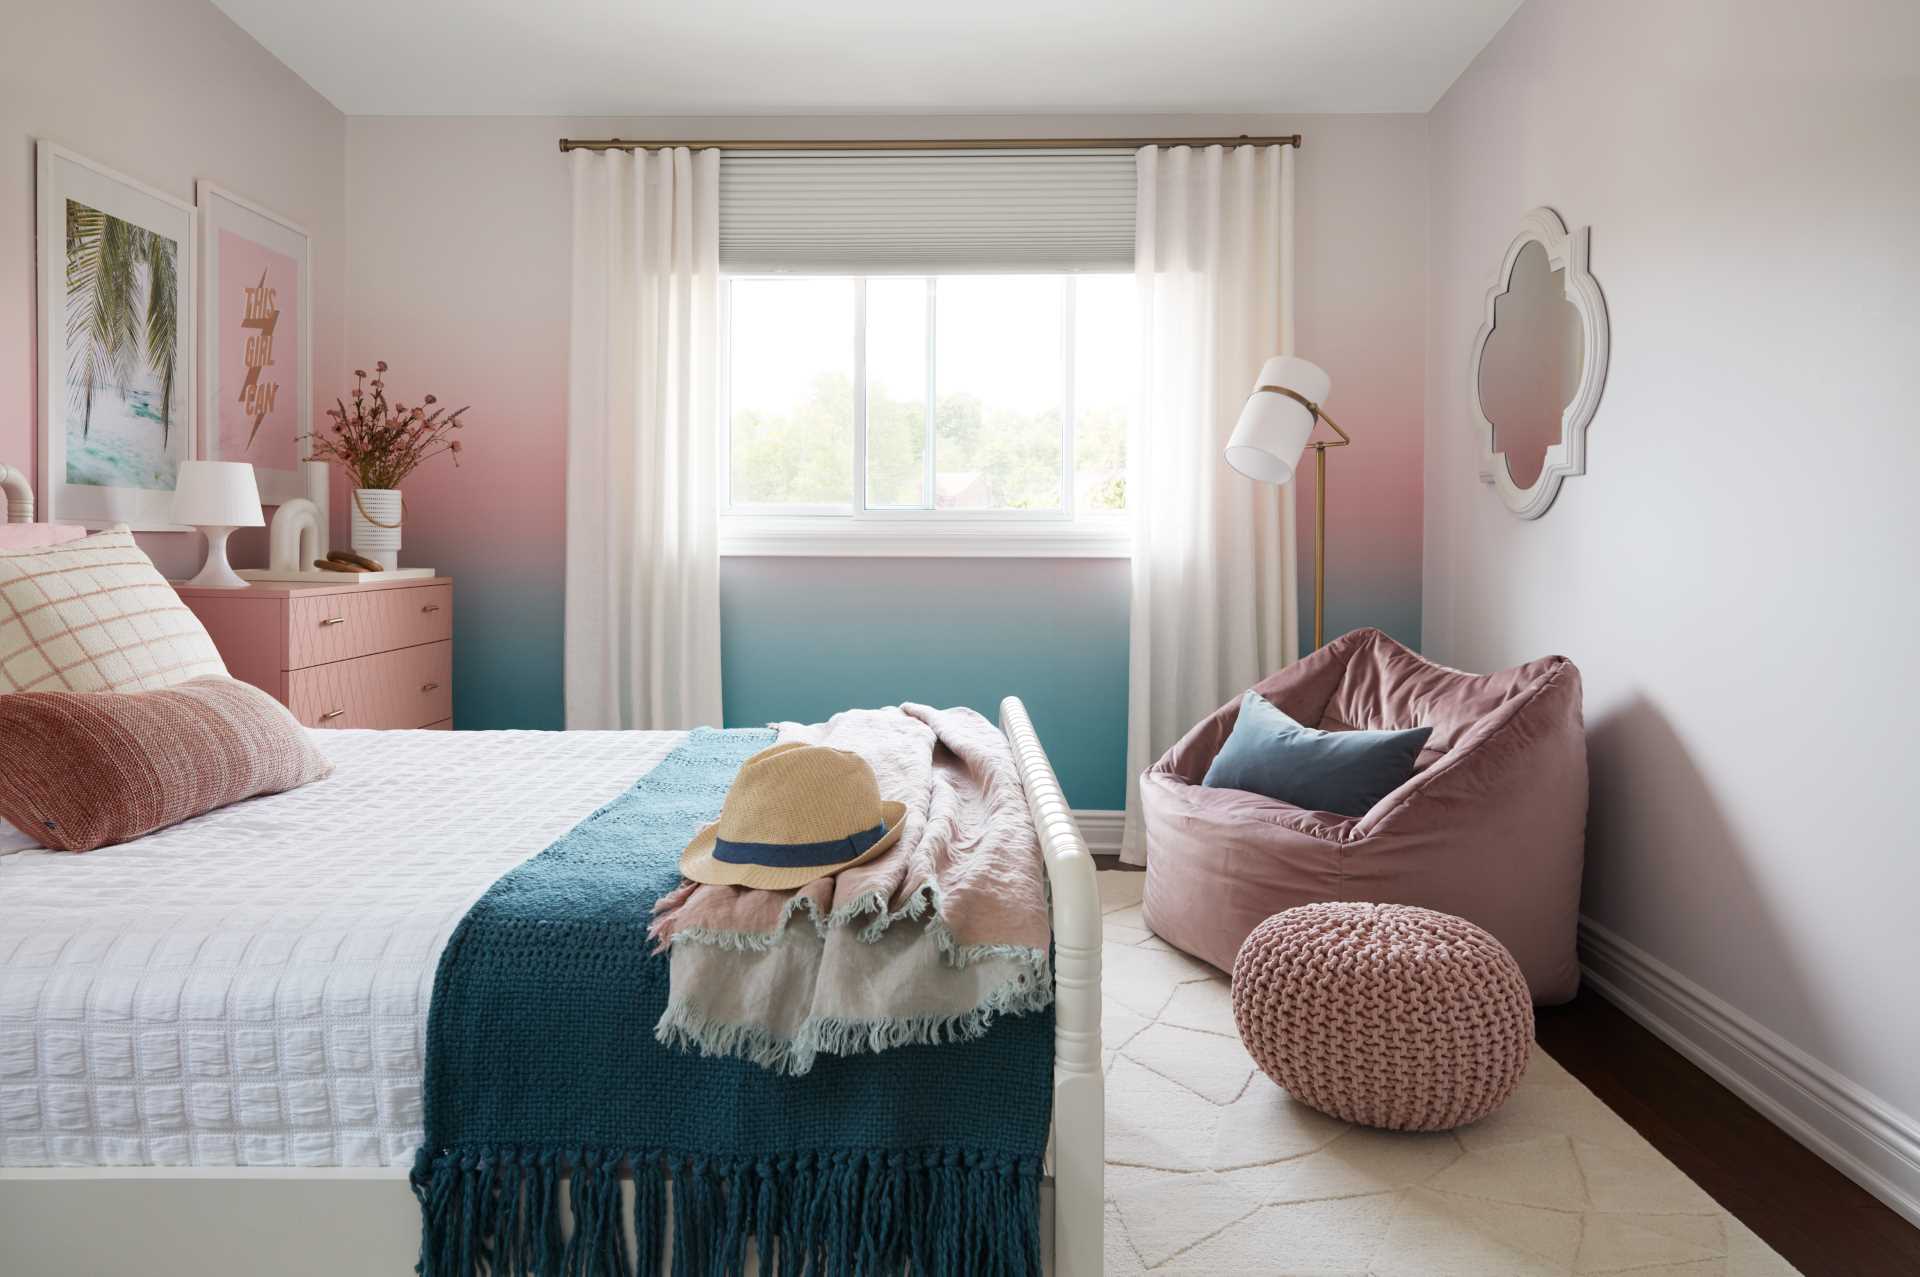 A colorful bedroom includes blue-to-pink ombre wallpaper with matching furniture and accessories.